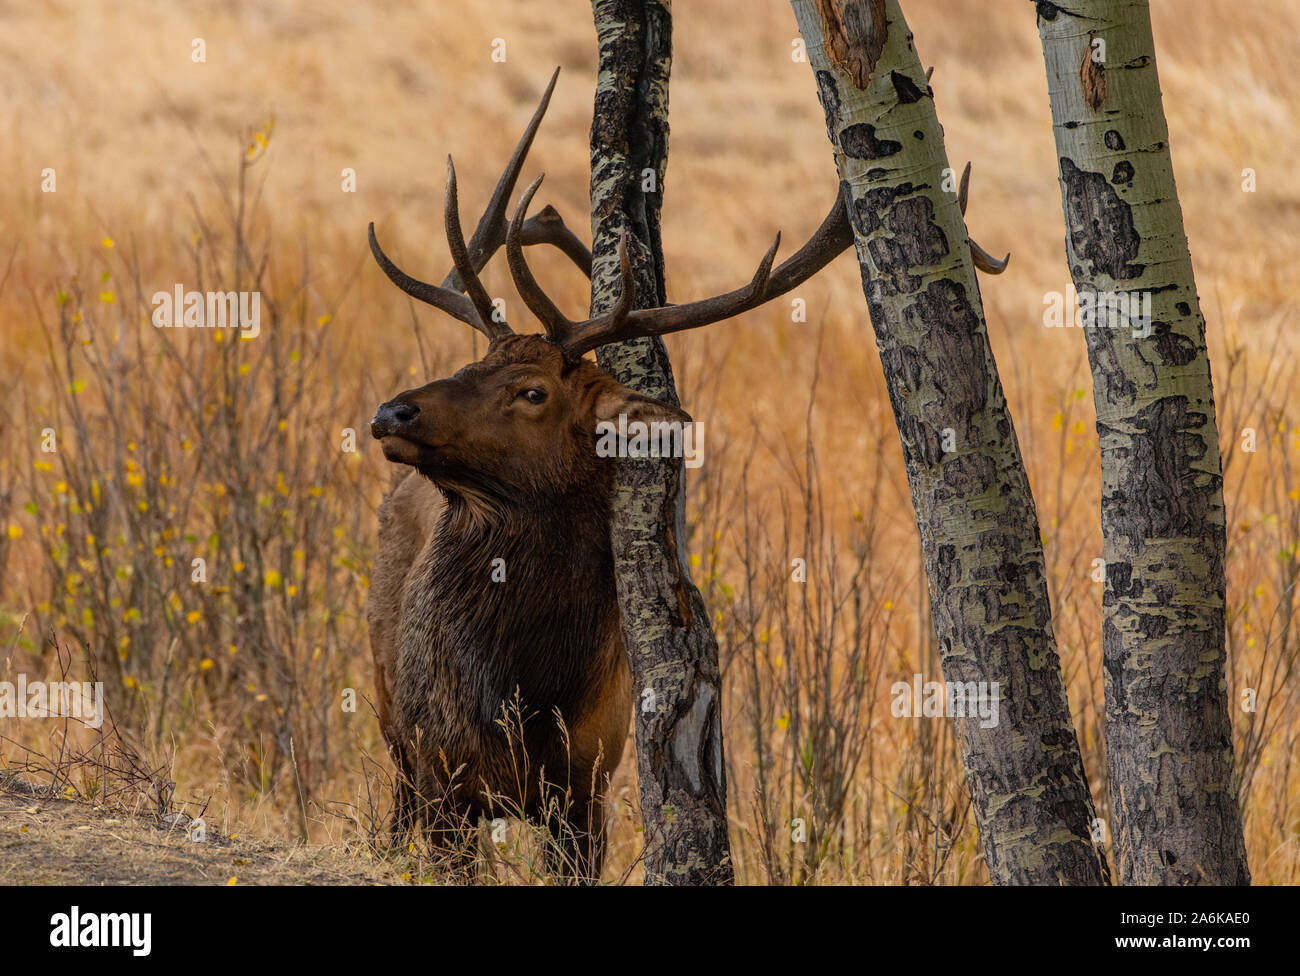 A Large Bull Elk Rubbing Against an Aspen Tree in the Fall Stock Photo